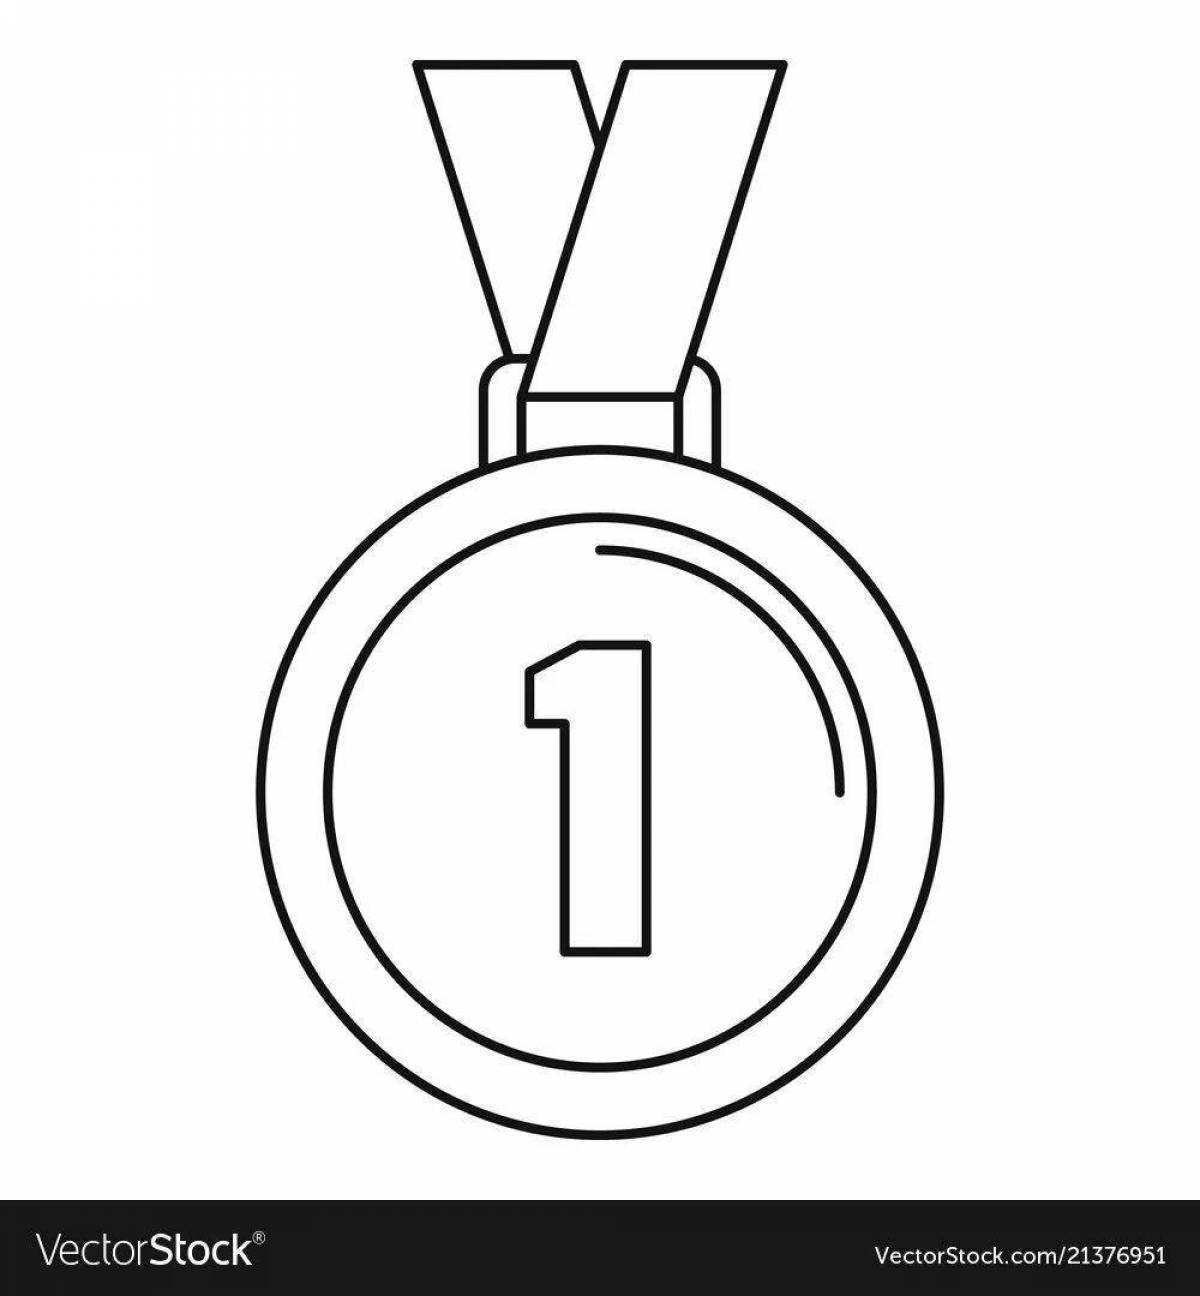 Bright medal template for February 23